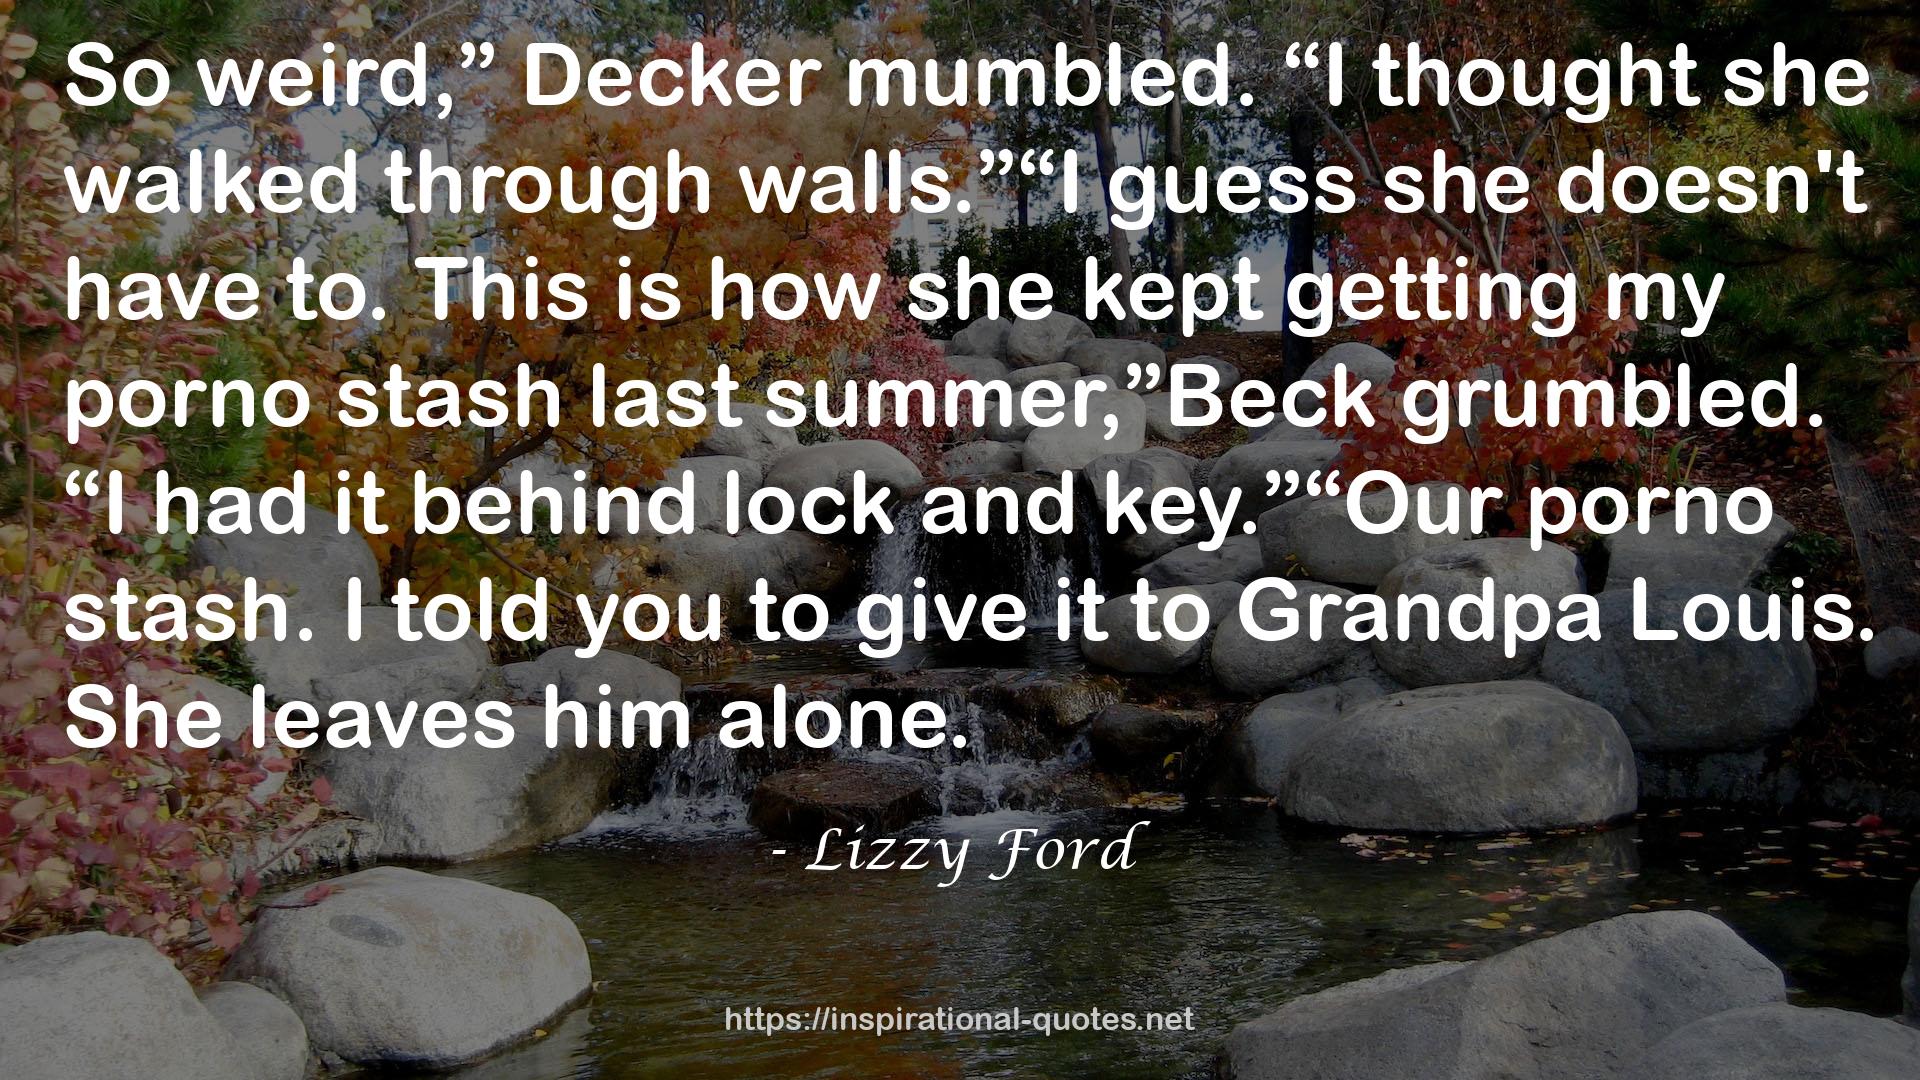 Lizzy Ford QUOTES